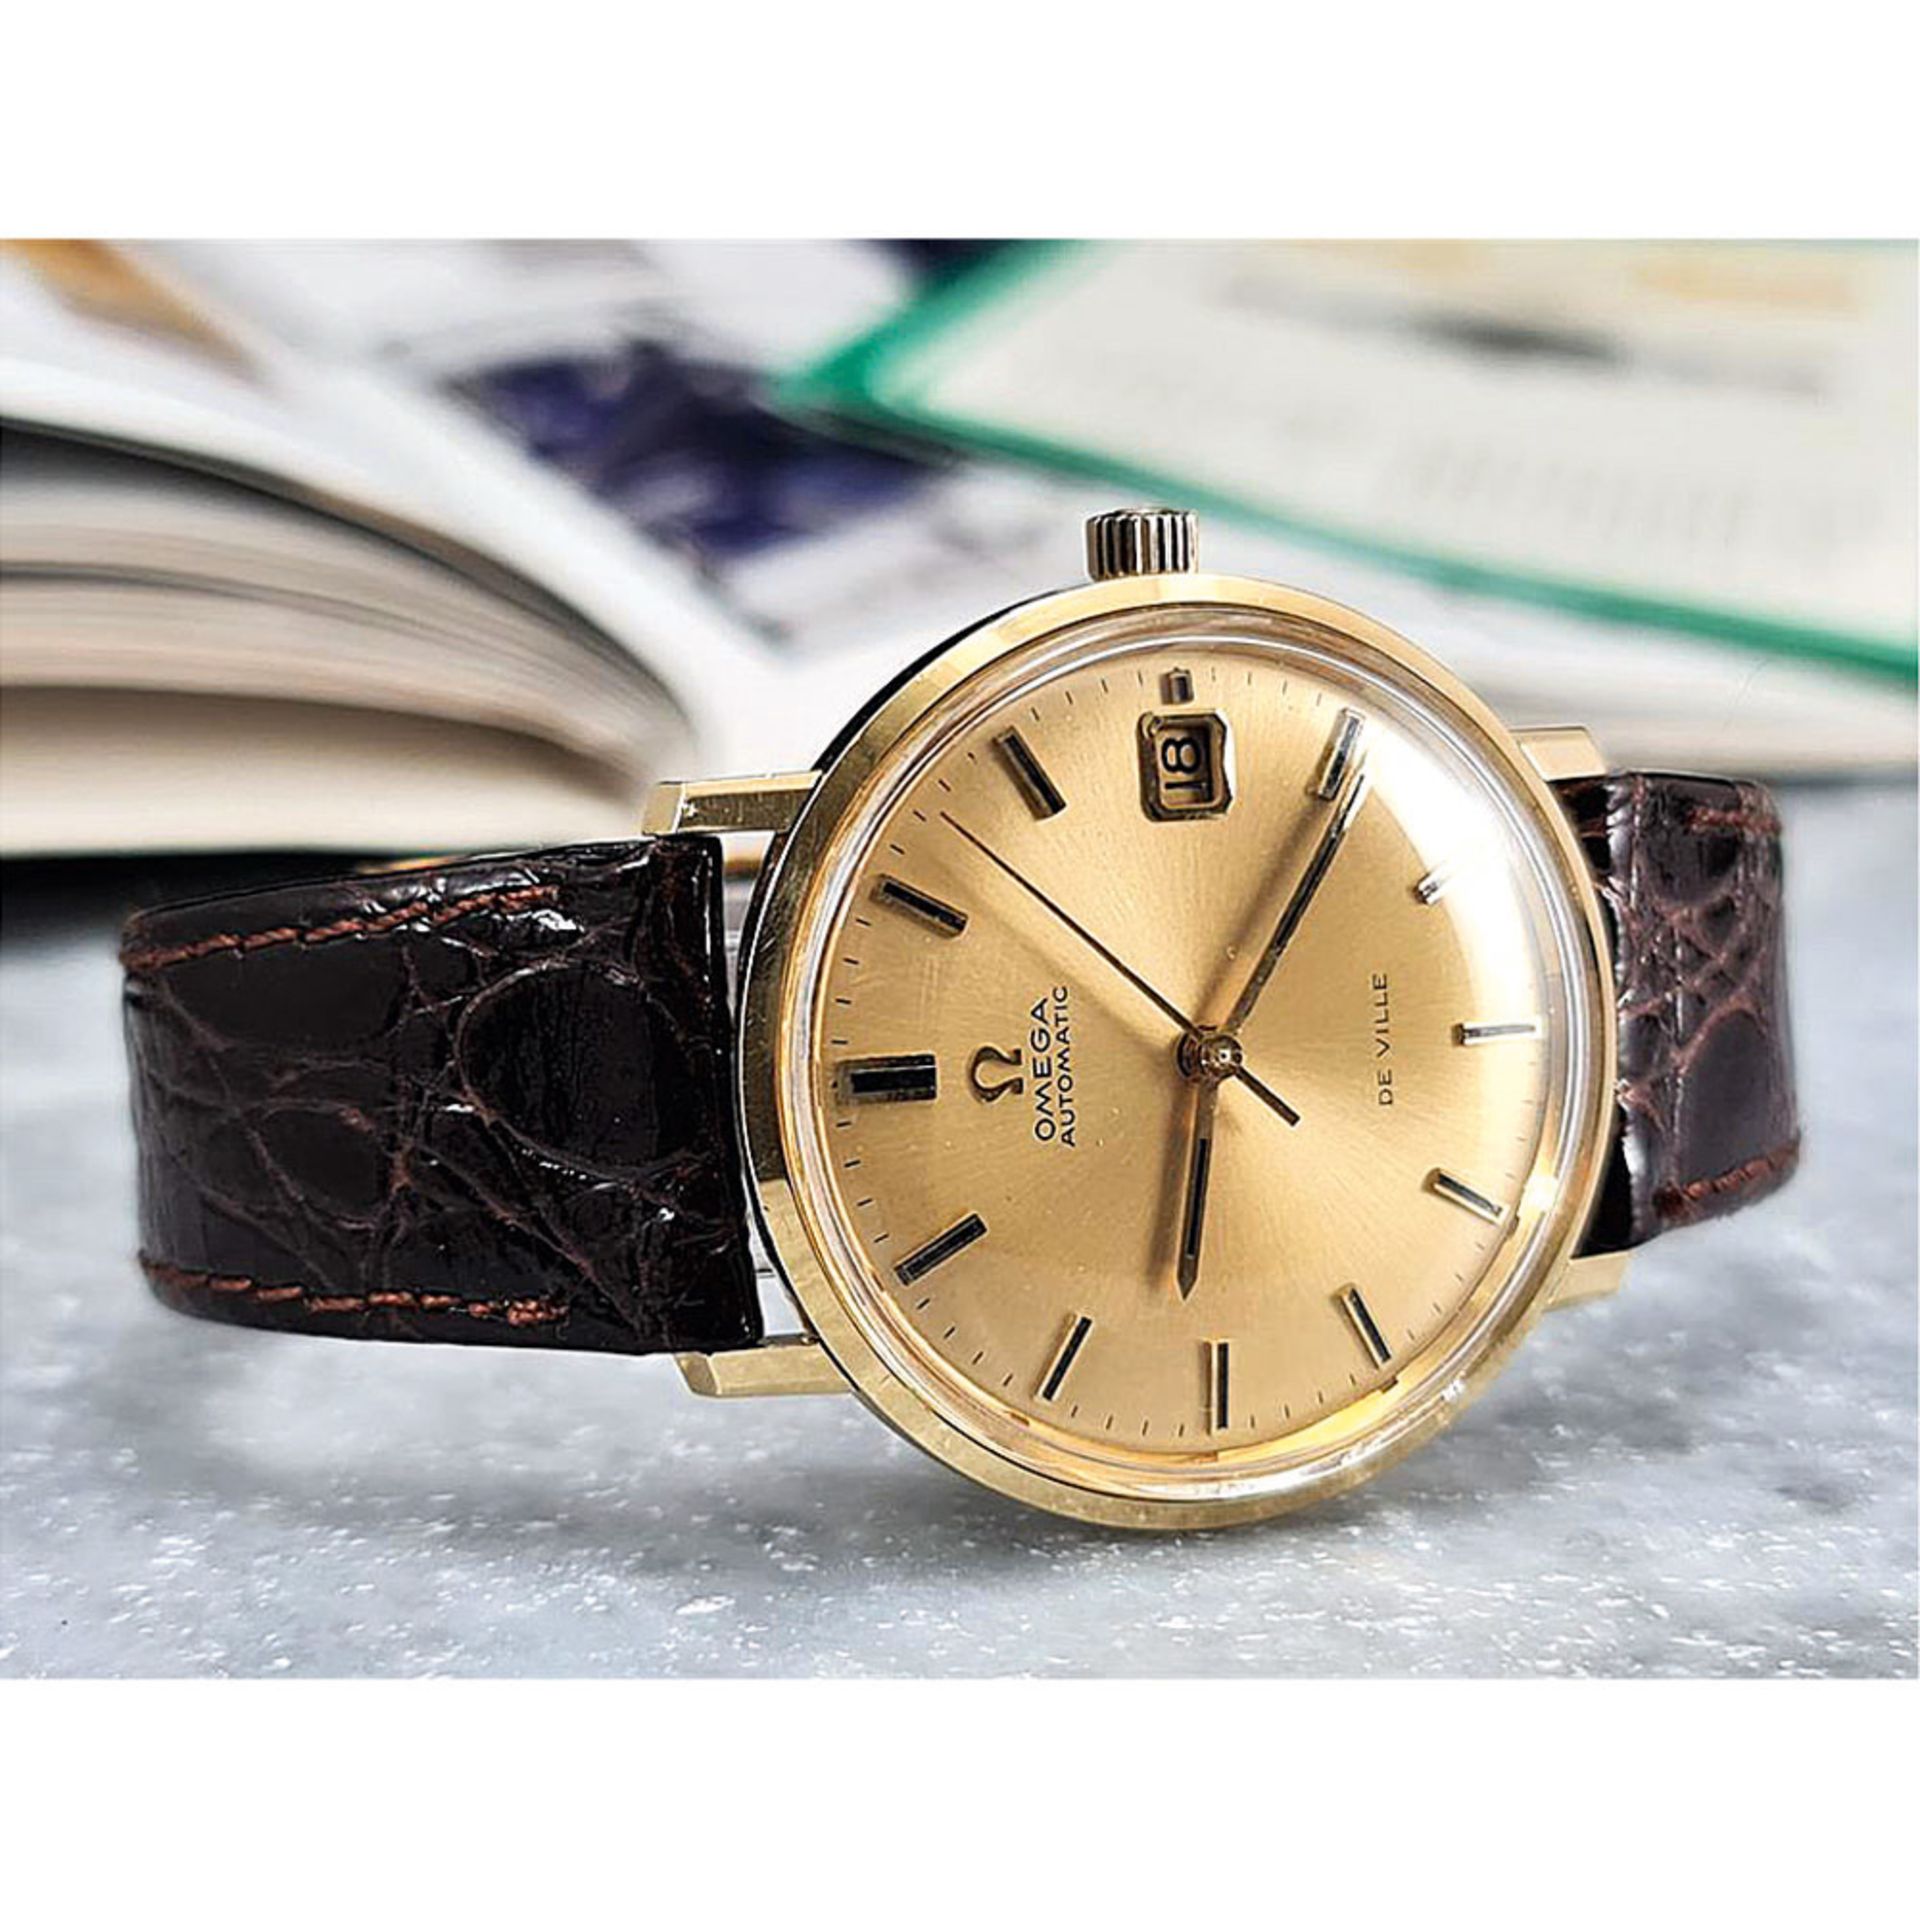 1970 Omega Seamaster De Ville Automatic Date - 14K Gold Watch - Image 2 of 8